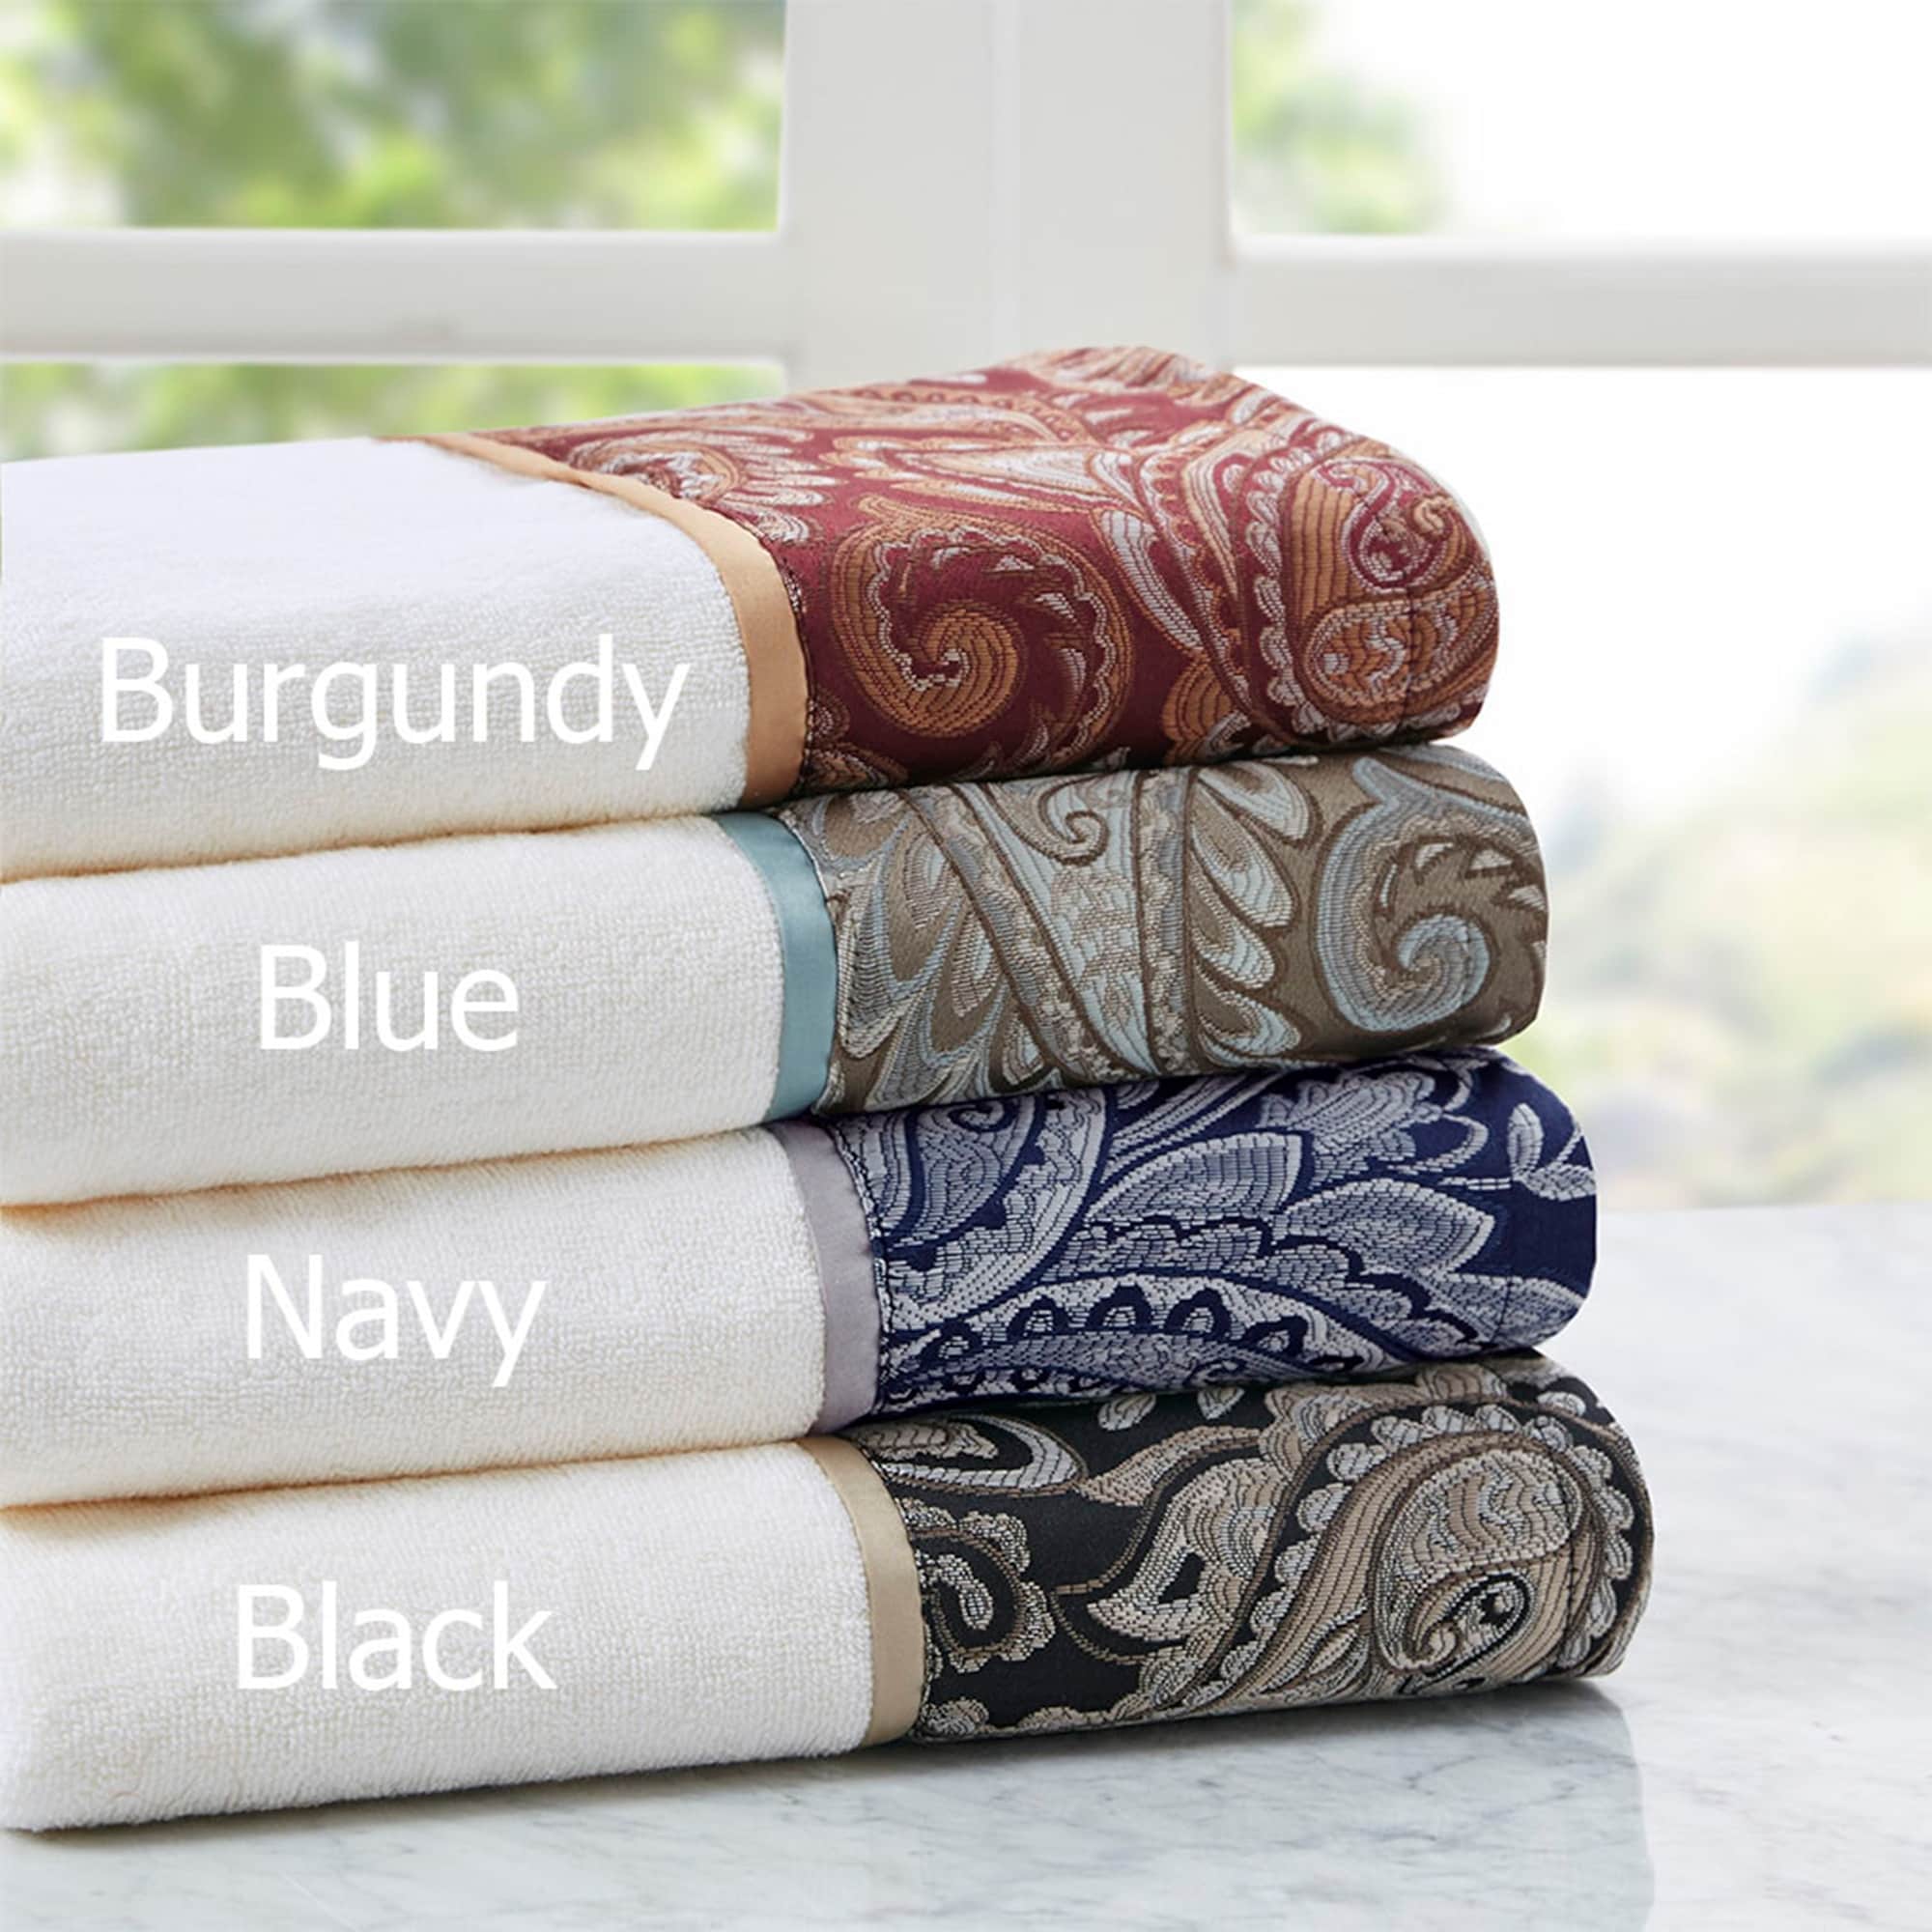 https://ak1.ostkcdn.com/images/products/is/images/direct/23f10fab225224a0c28cd4a96df3aba1805d9af8/Gracewood-Hollow-Abley-Cotton-6-piece-Jacquard-Towel-Set.jpg